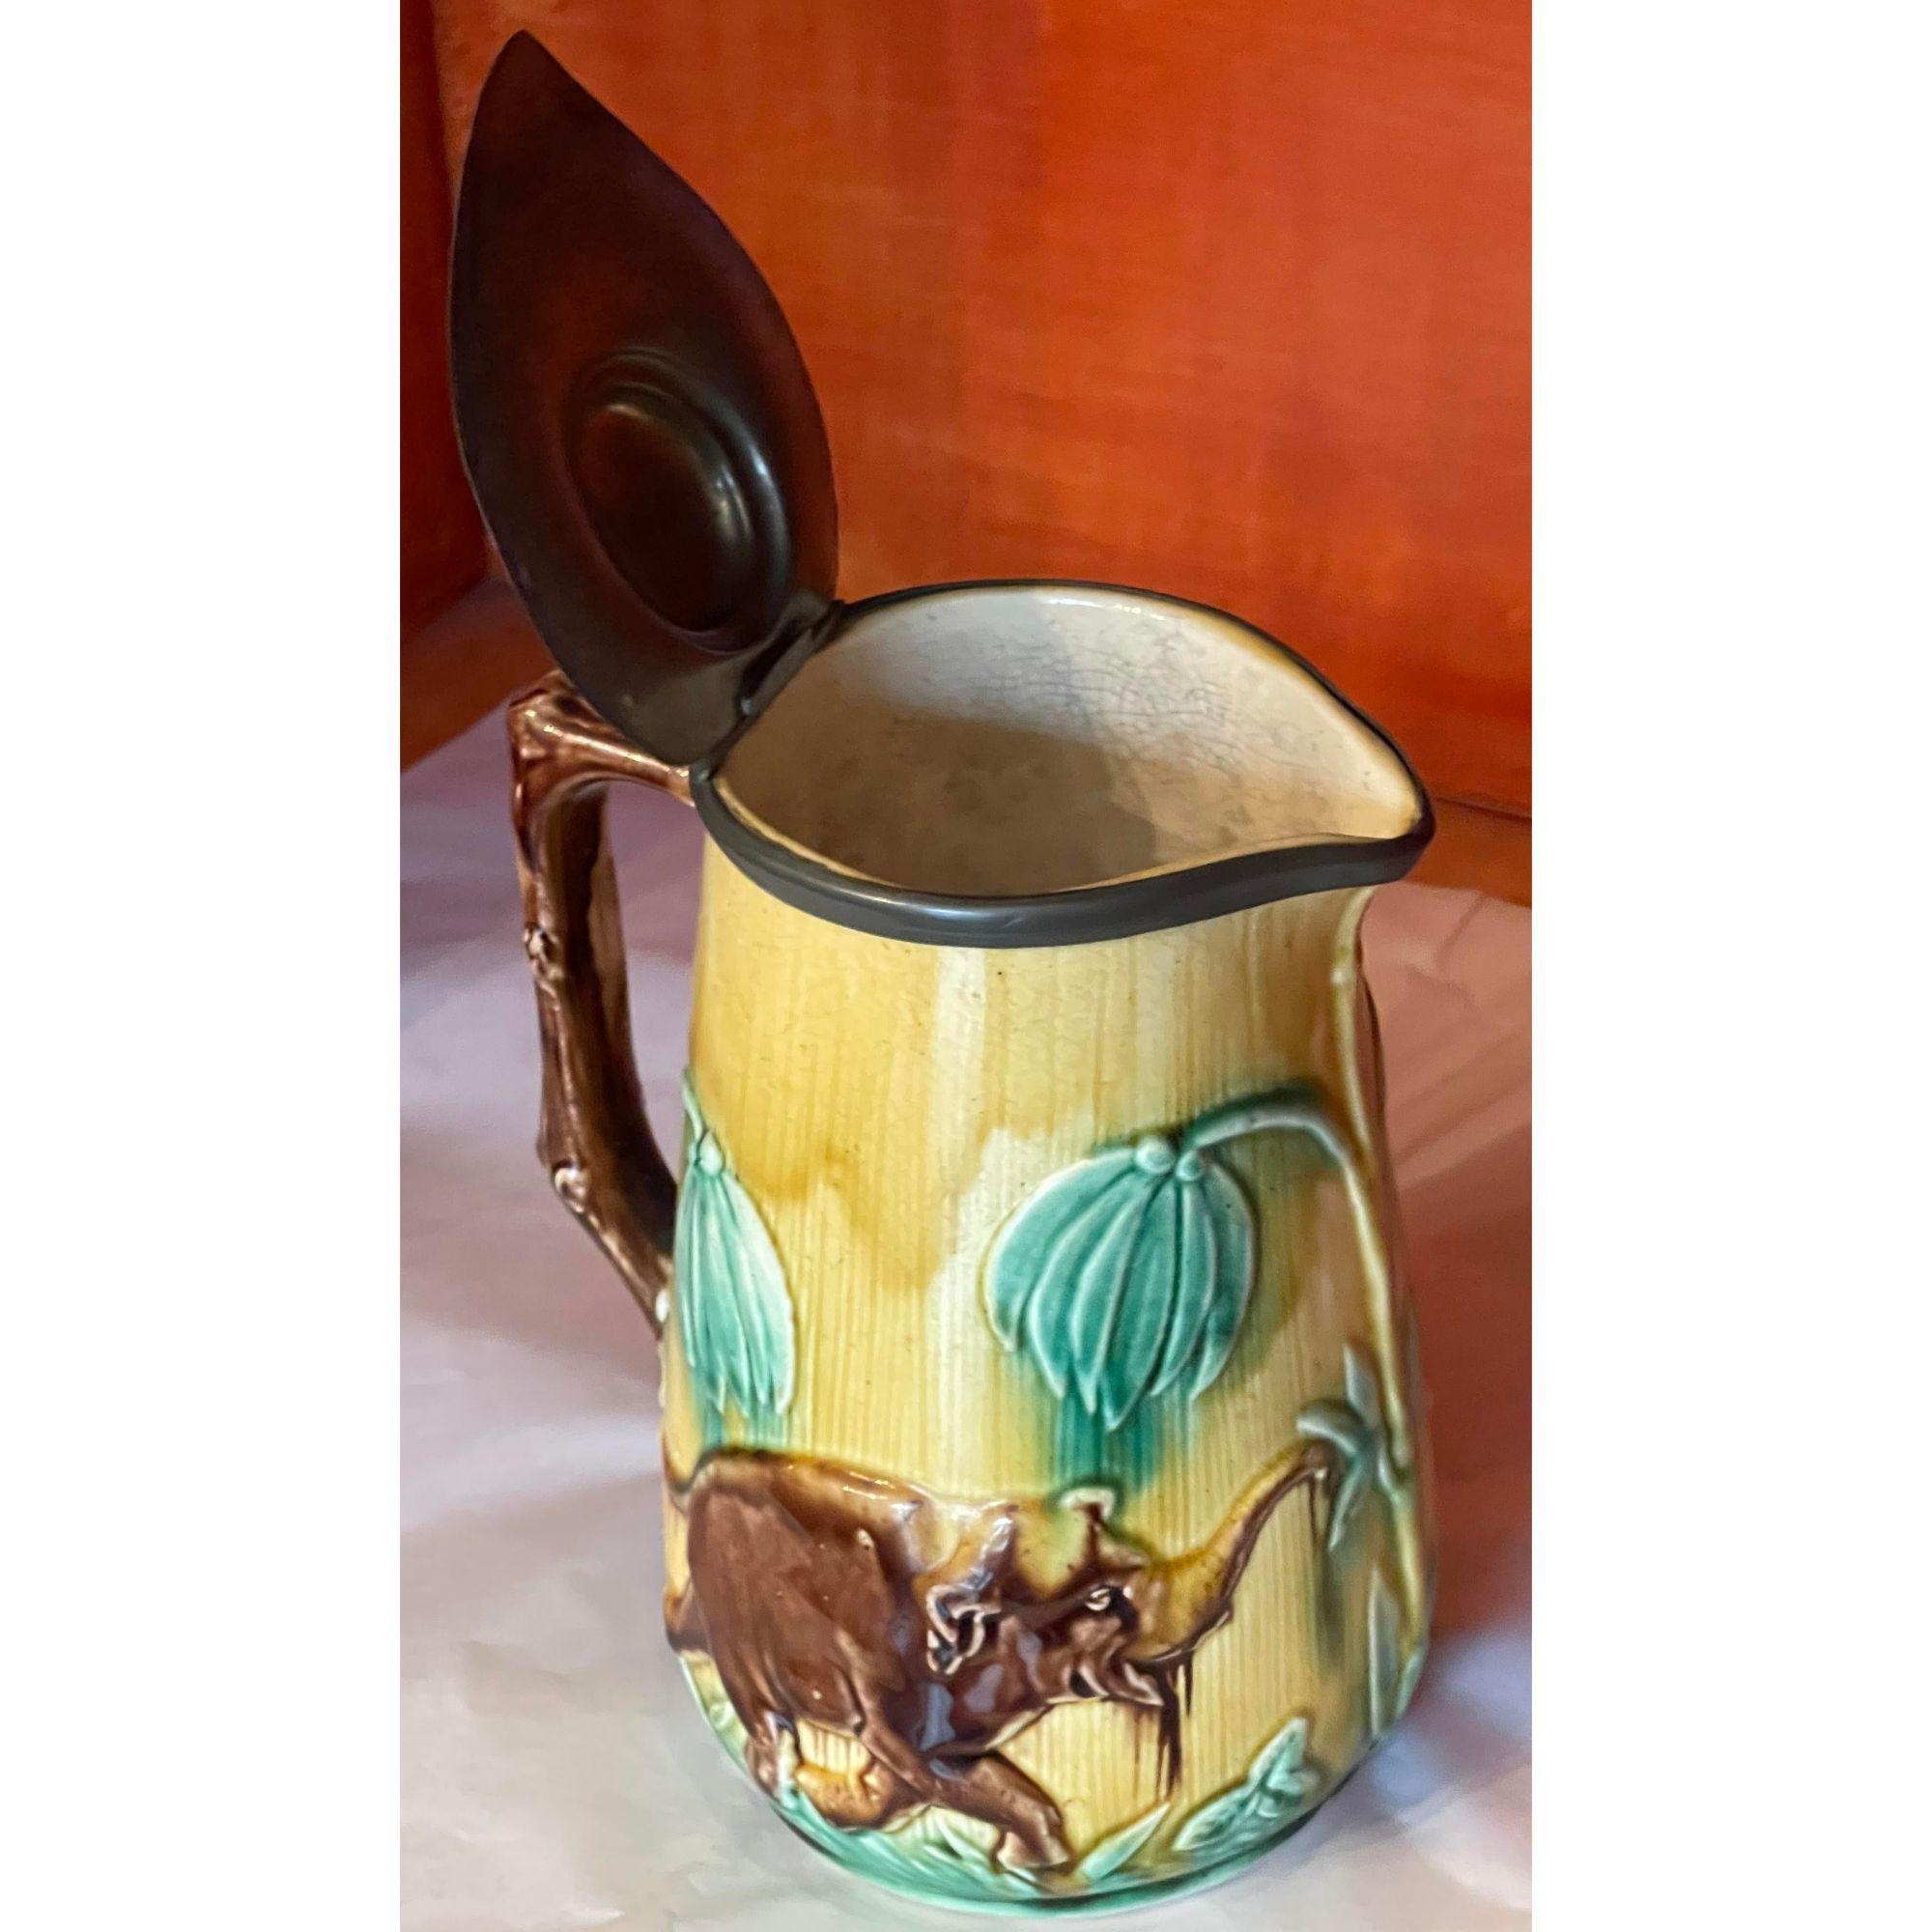 Rare Antique Majolica Pottery Elephant Lidded Jug Pitcher

Additional information:
Materials: Pewter, Pottery
Color: Yellow
Period: 19th century
Styles: Victorian
Item Type: Vintage, Antique or Pre-owned
Dimensions: 5